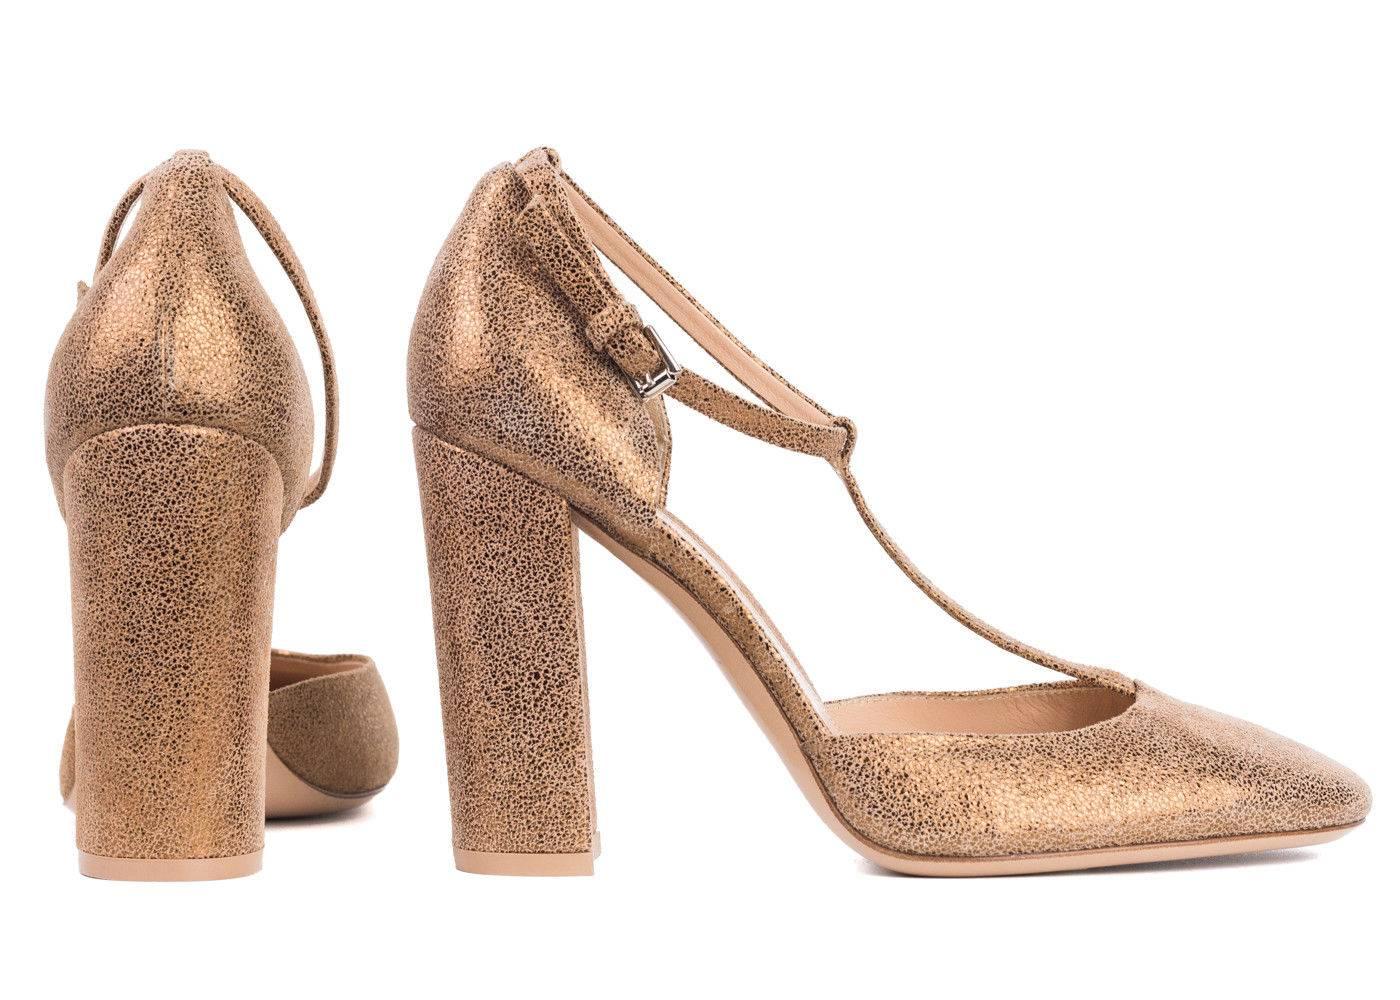 Gianvito Rossi Metallic Gold T Strap Suede Pumps In New Condition For Sale In Brooklyn, NY